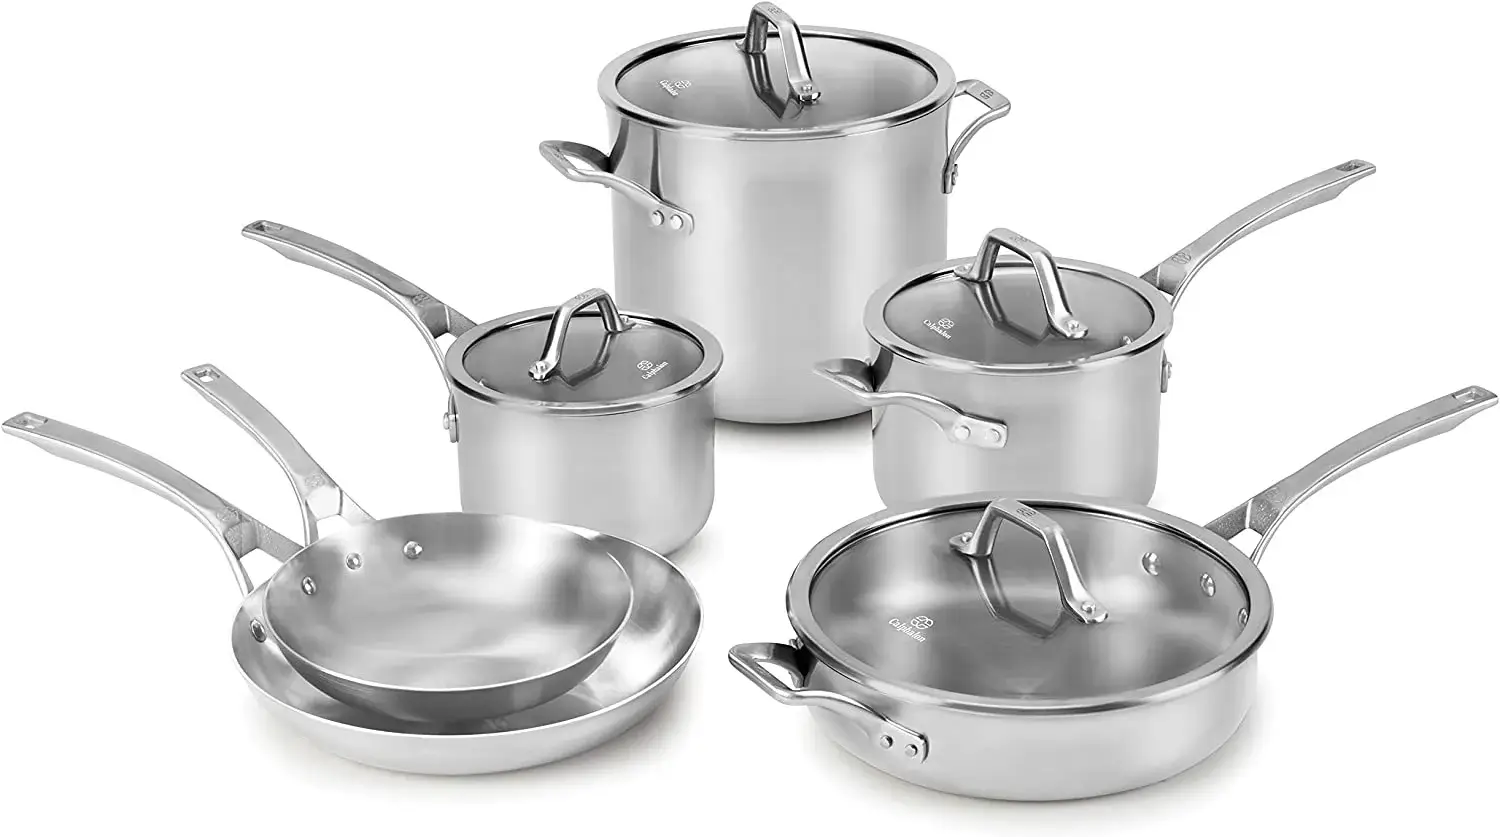 Calphalon Signature Stainless Steel Cookware - Most Durable